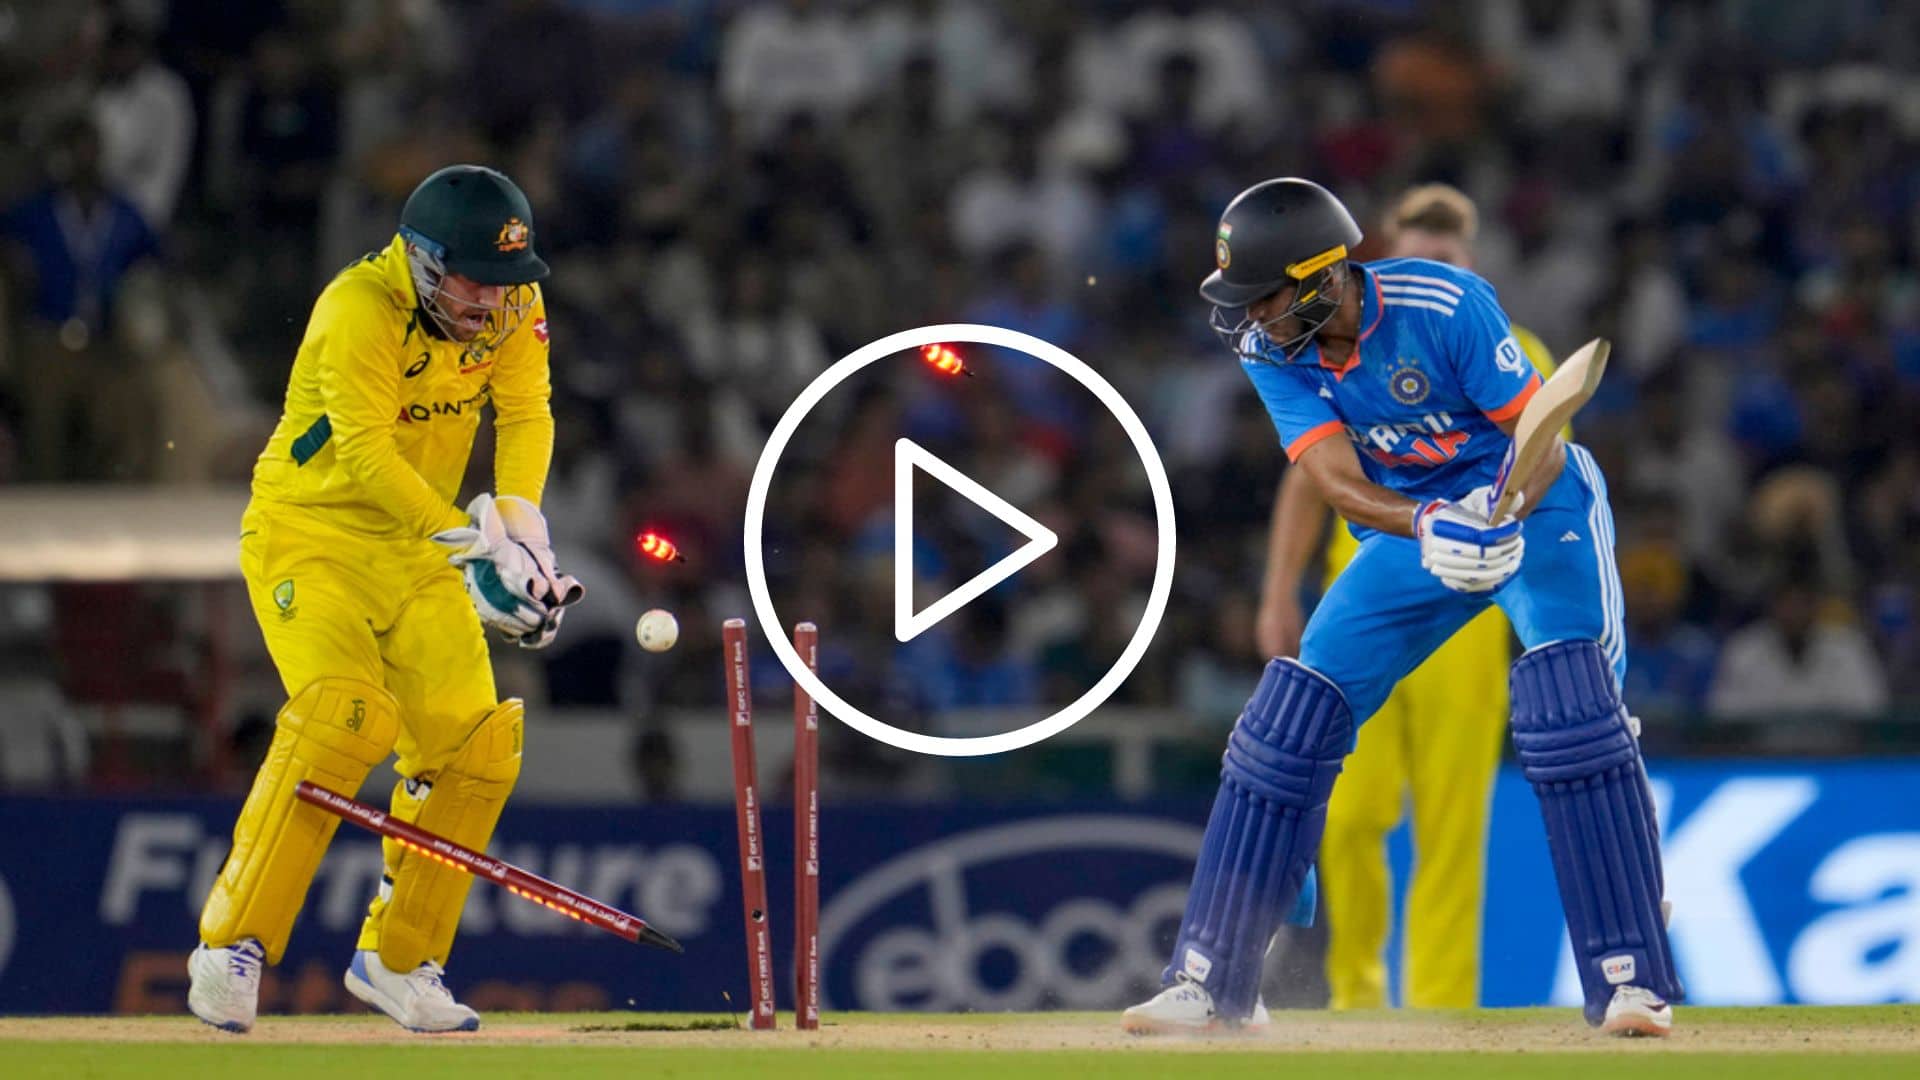 [Watch] Adam Zampa Knocks Over Shubman Gill With A Magical Delivery